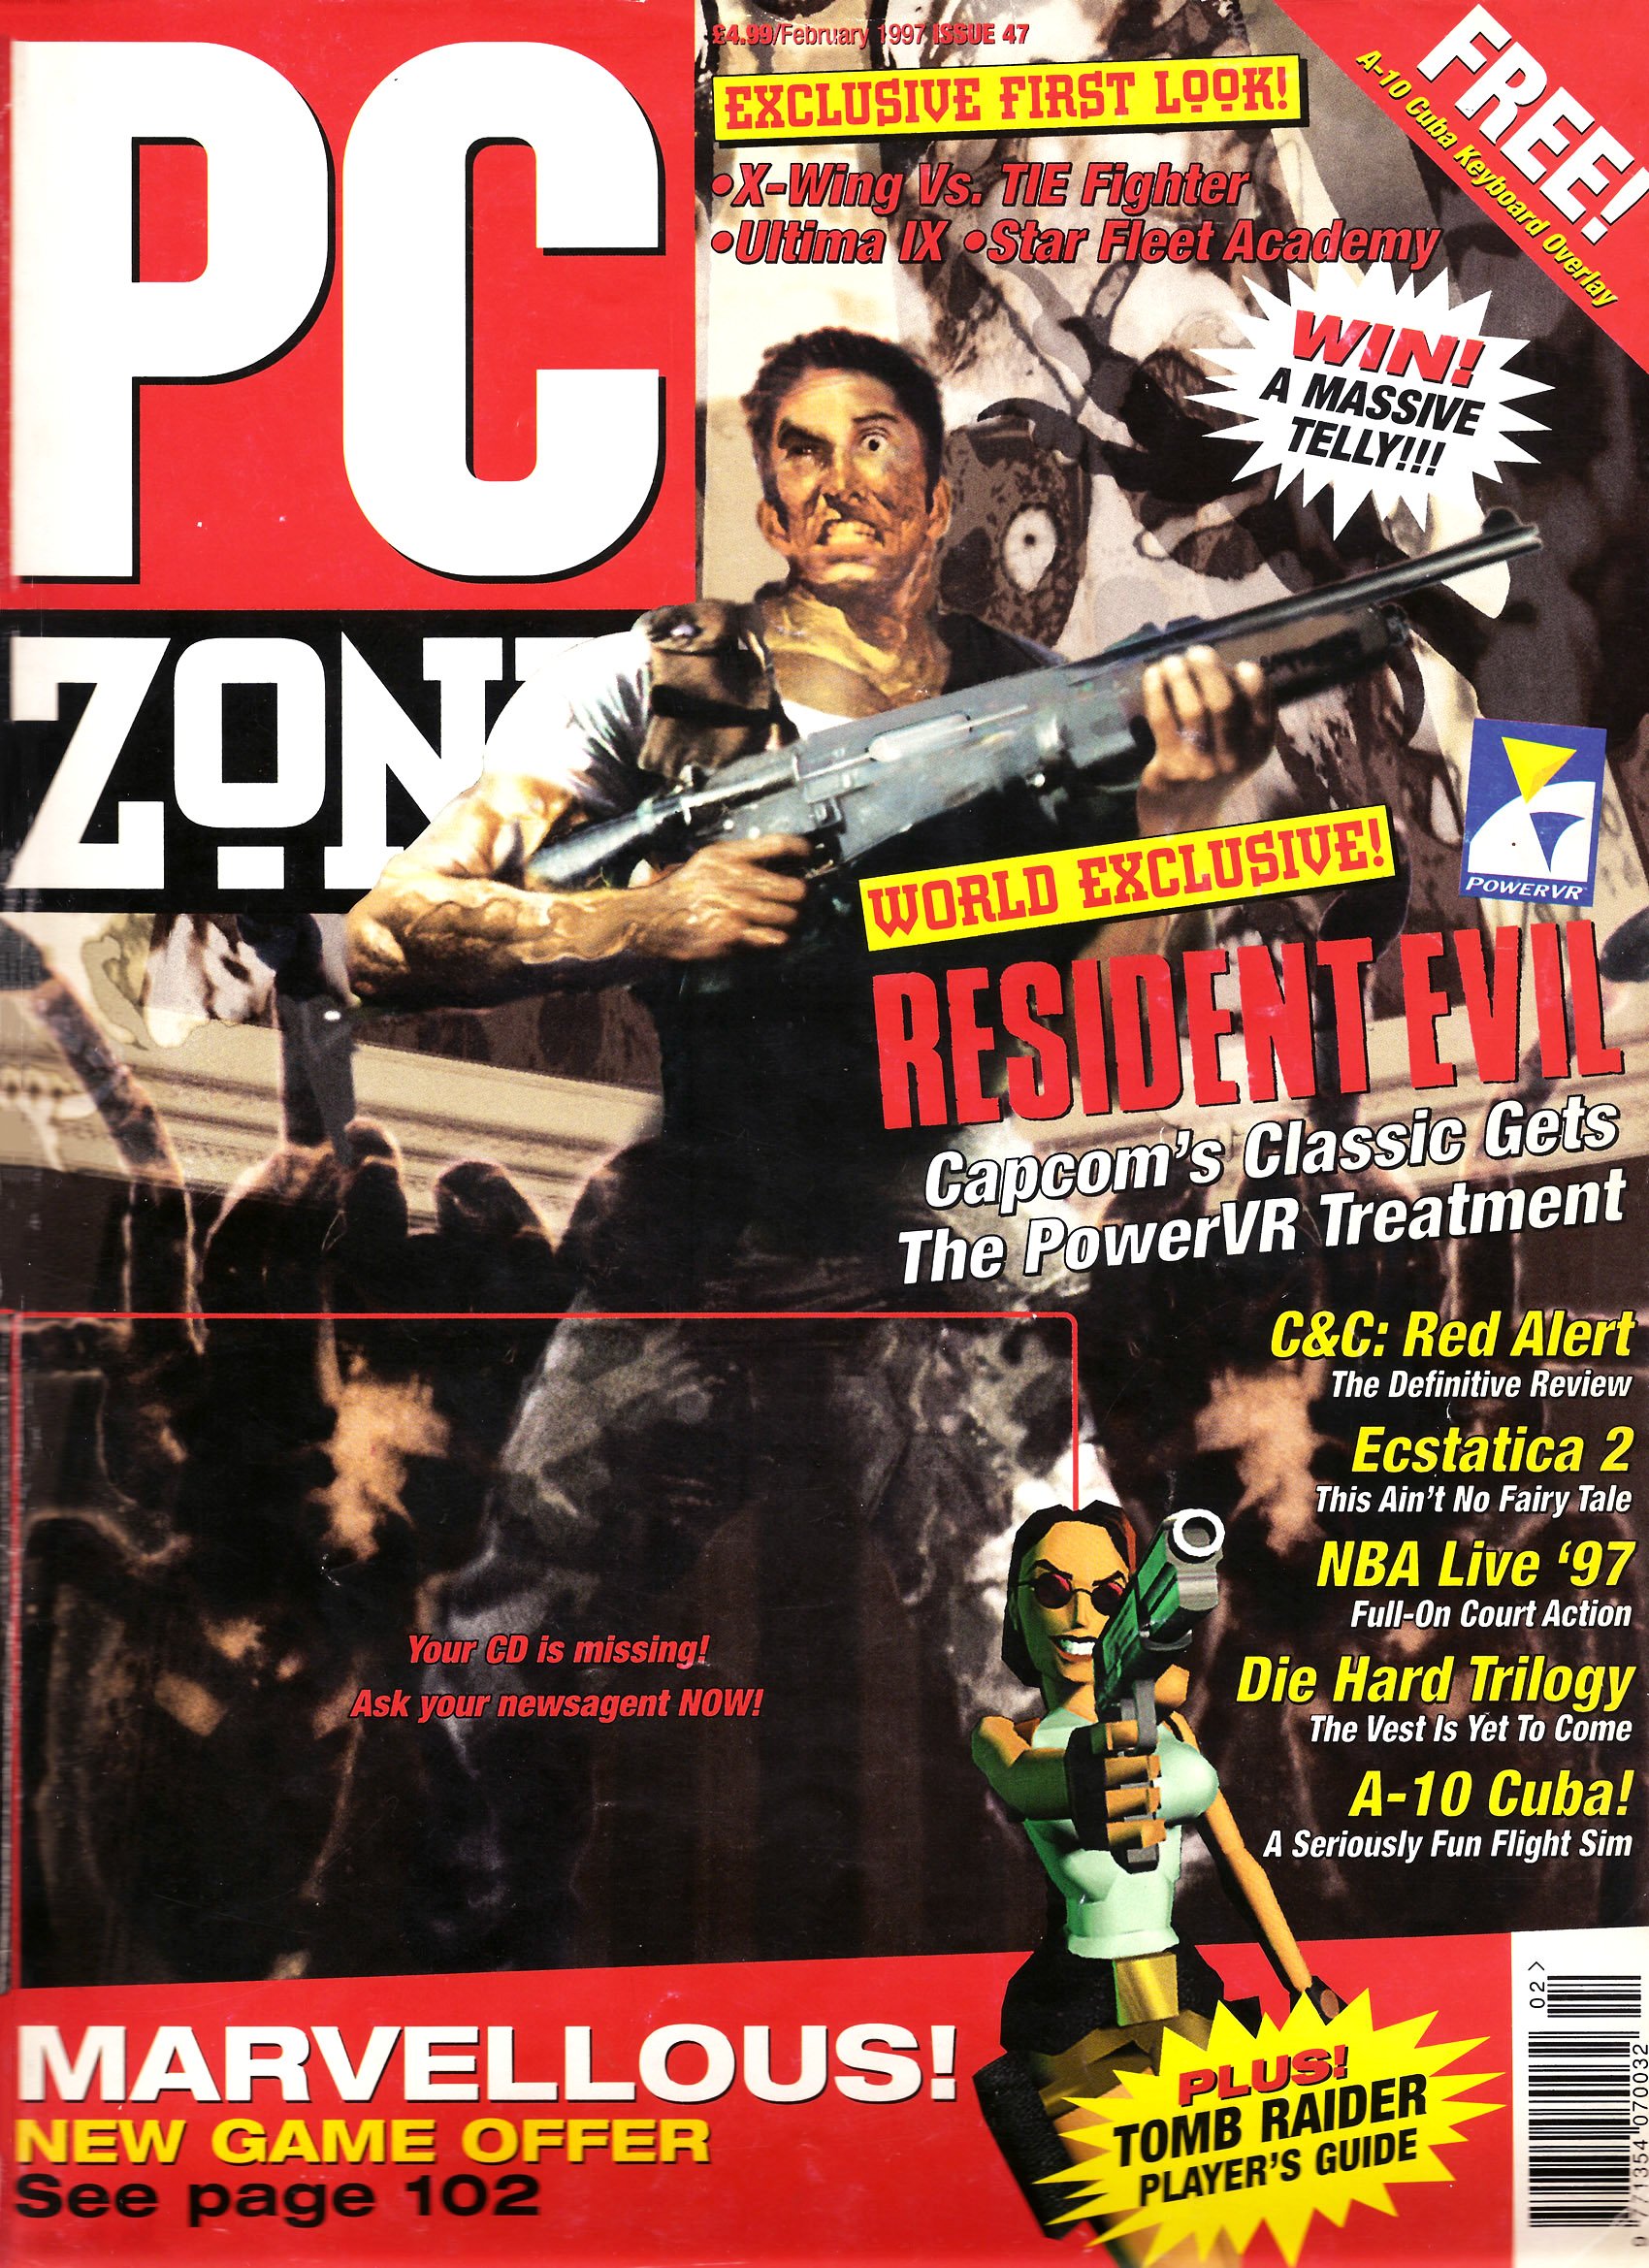 PC Zone Issue 047 (February 1997)